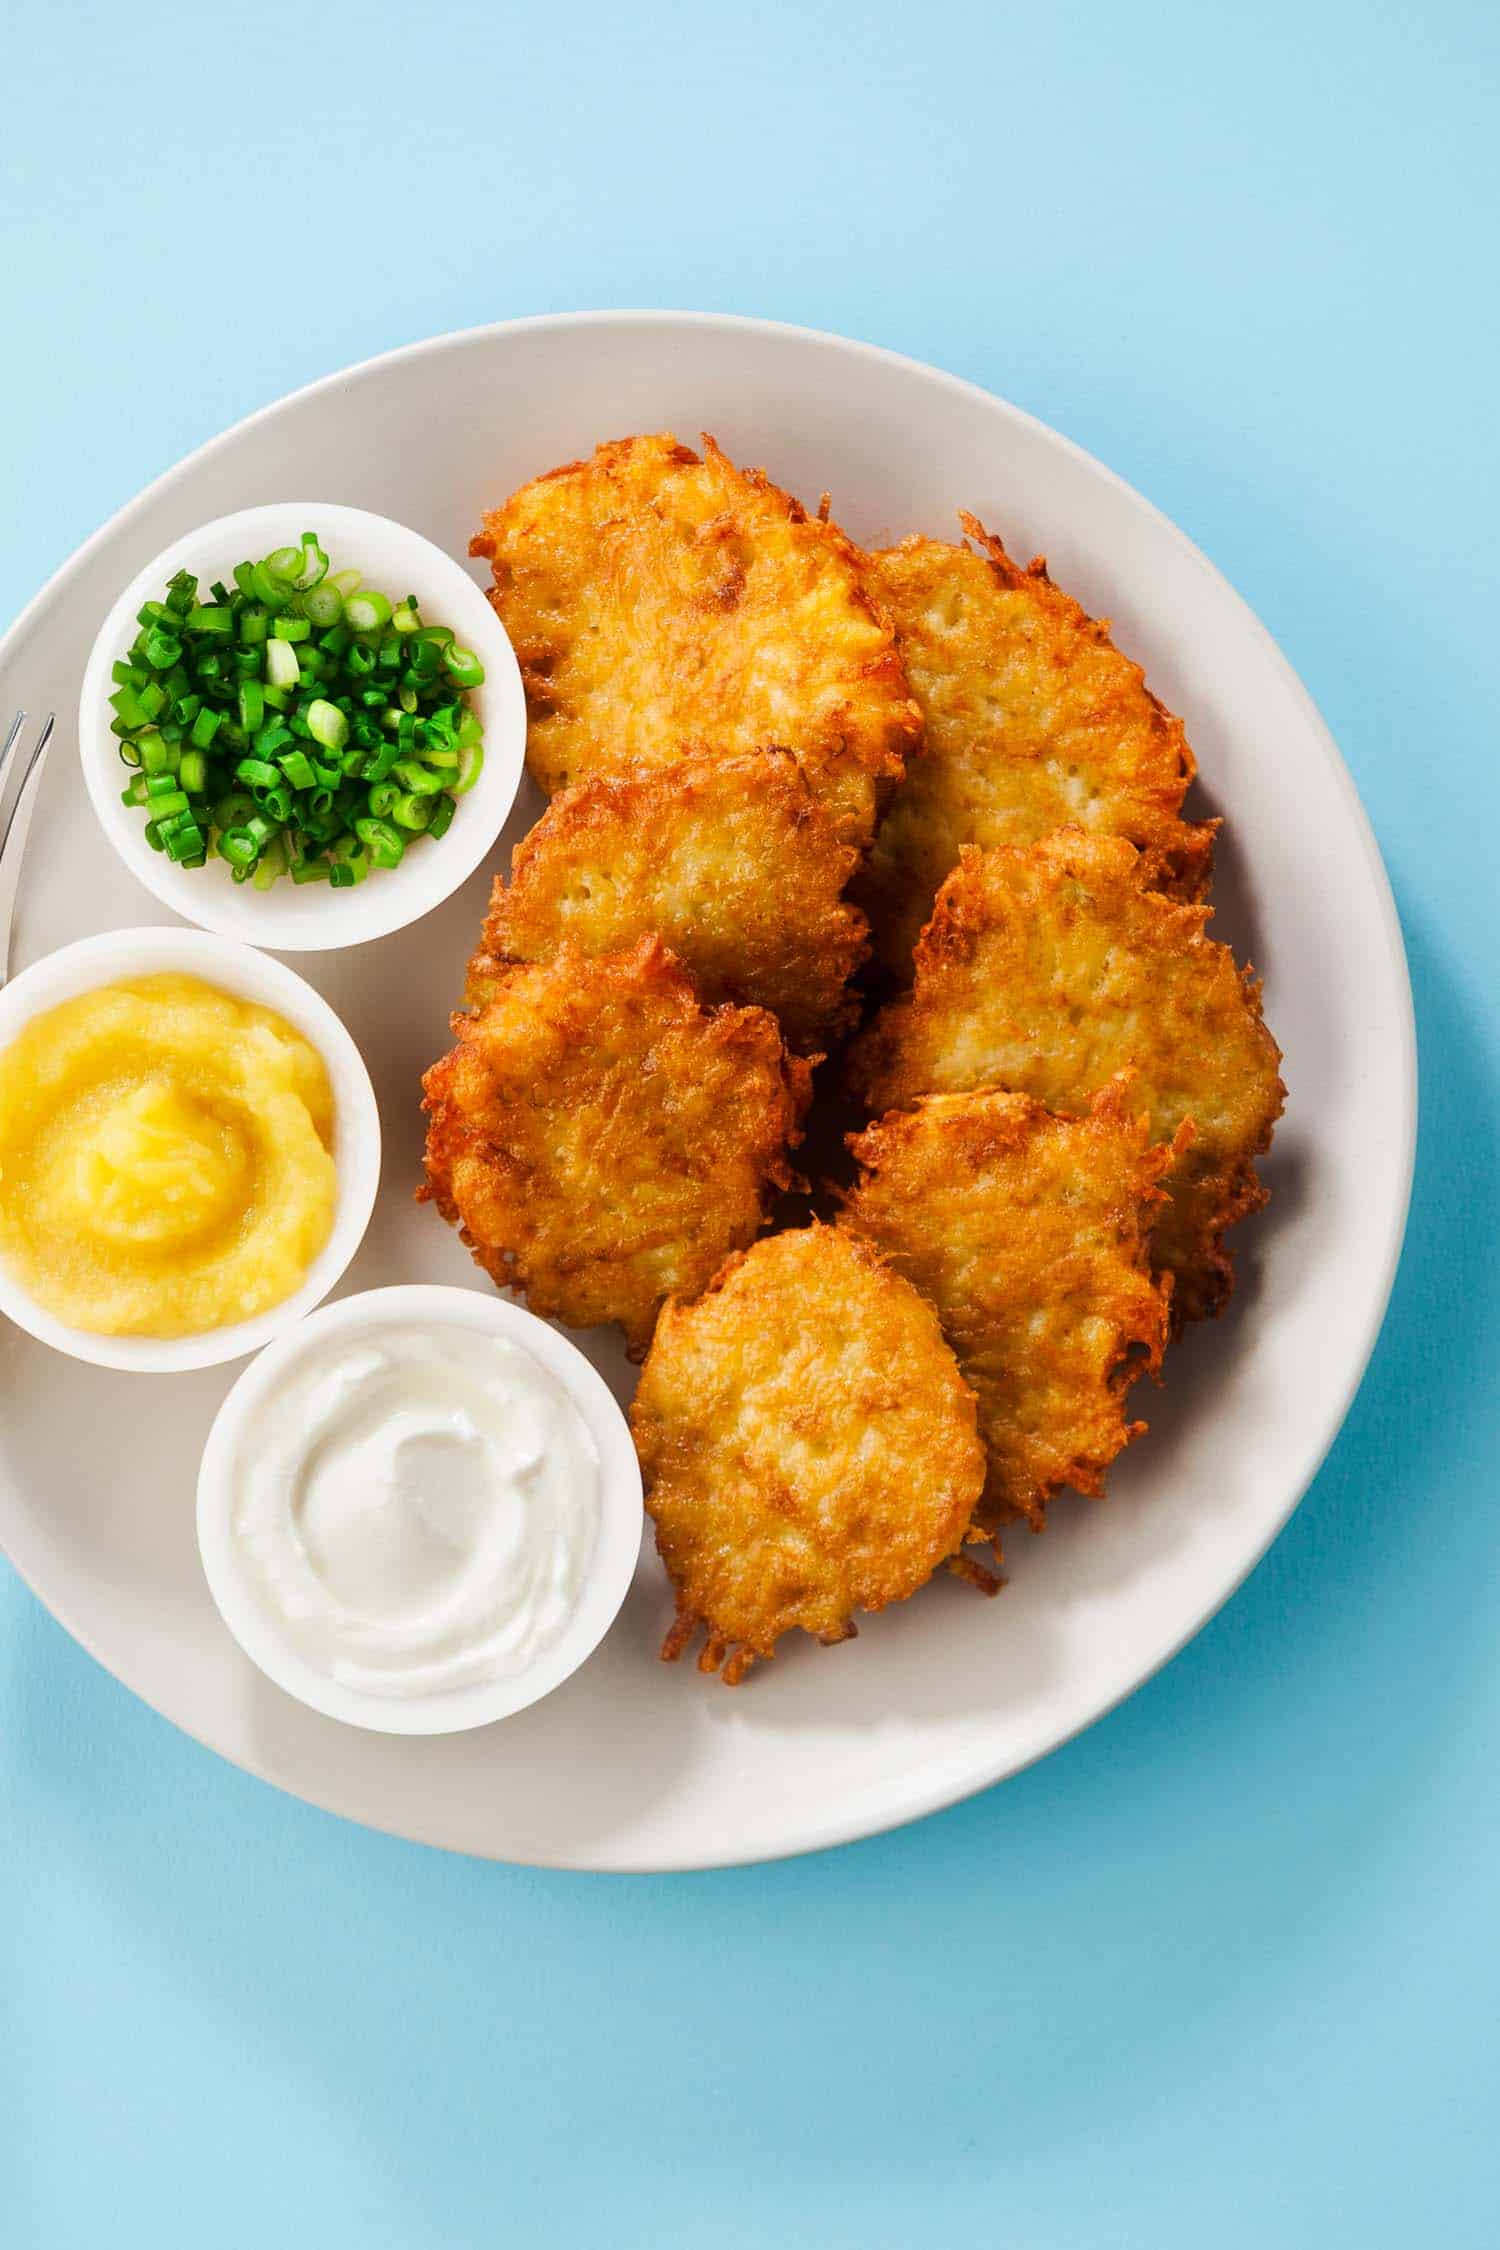 Potato pancakes, latkes or boxty and sauces from sour cream, yogurt, apple sauce and finely chopped green onion isolated on a blue background